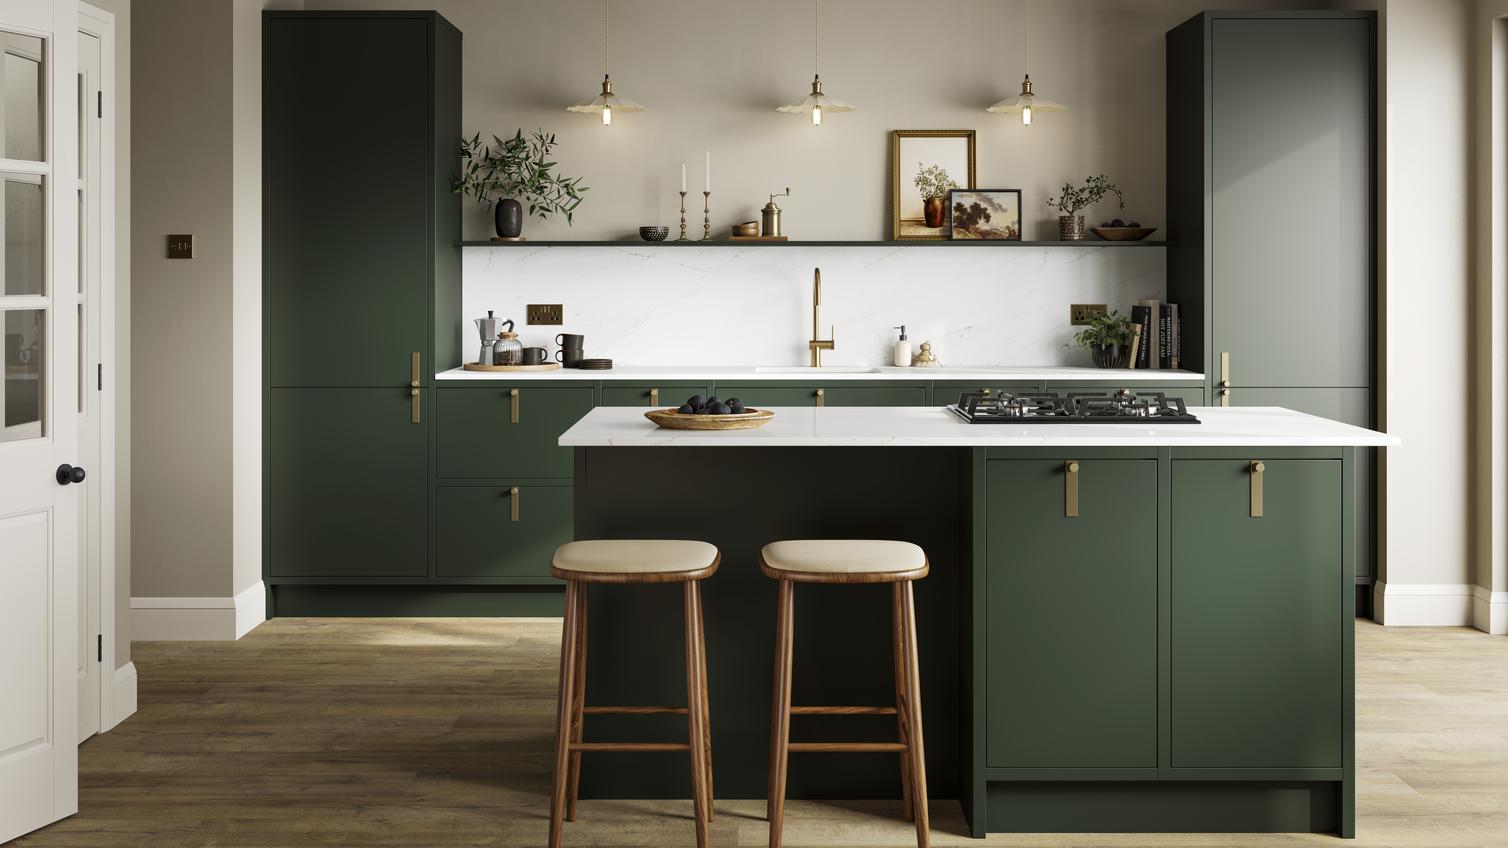 A dark green kitchen with matt cabinets, brass door handles, and a kitchen island complete with a gas hob.